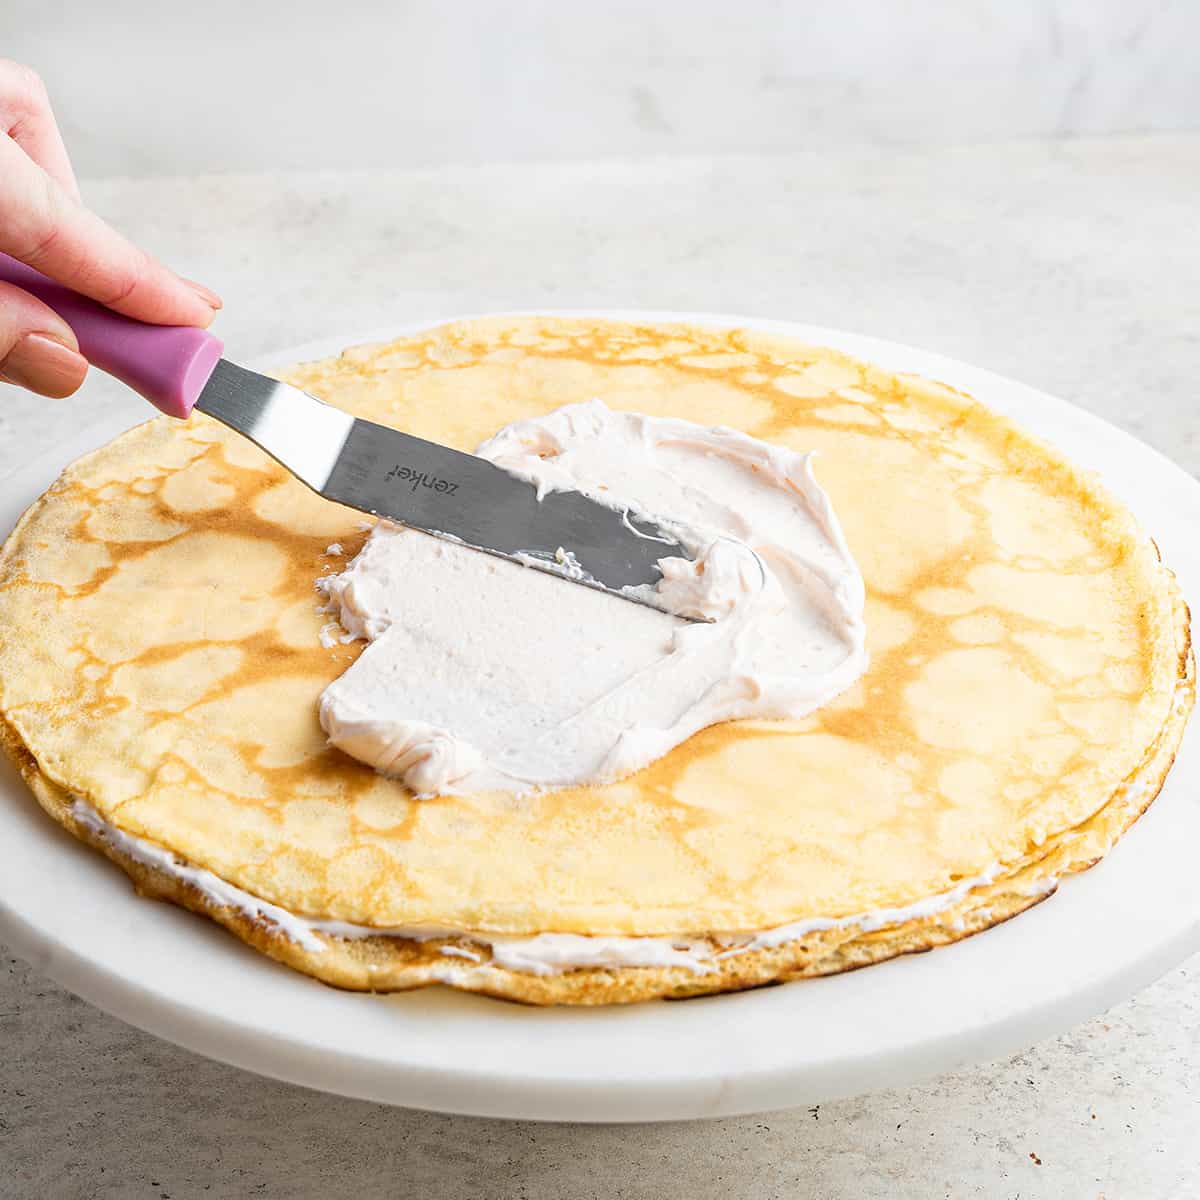 A hand using an offset spatula to spread filling onto a crepe